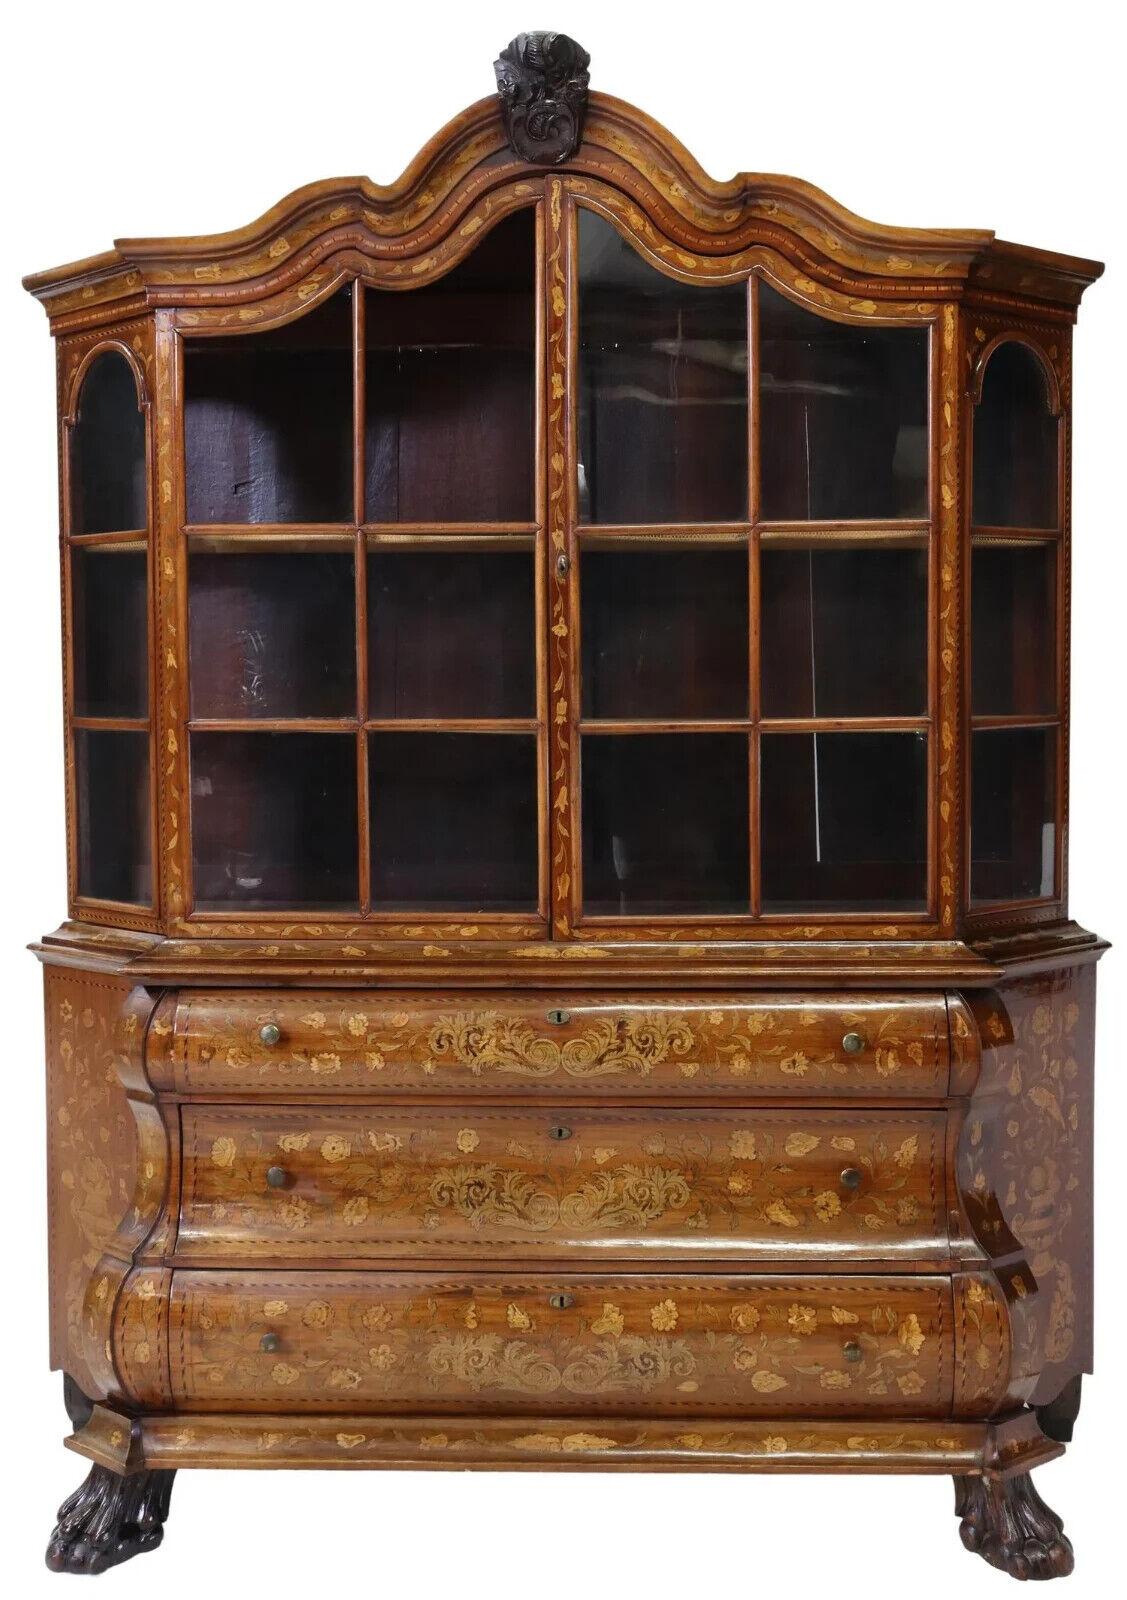 Gorgeous Antique Vitrine On Chest, Dutch Marquetry, Inlaid, Display, 18th C., 1700s!!

Dutch marquetry inlaid vitrine on chest, approximately 92